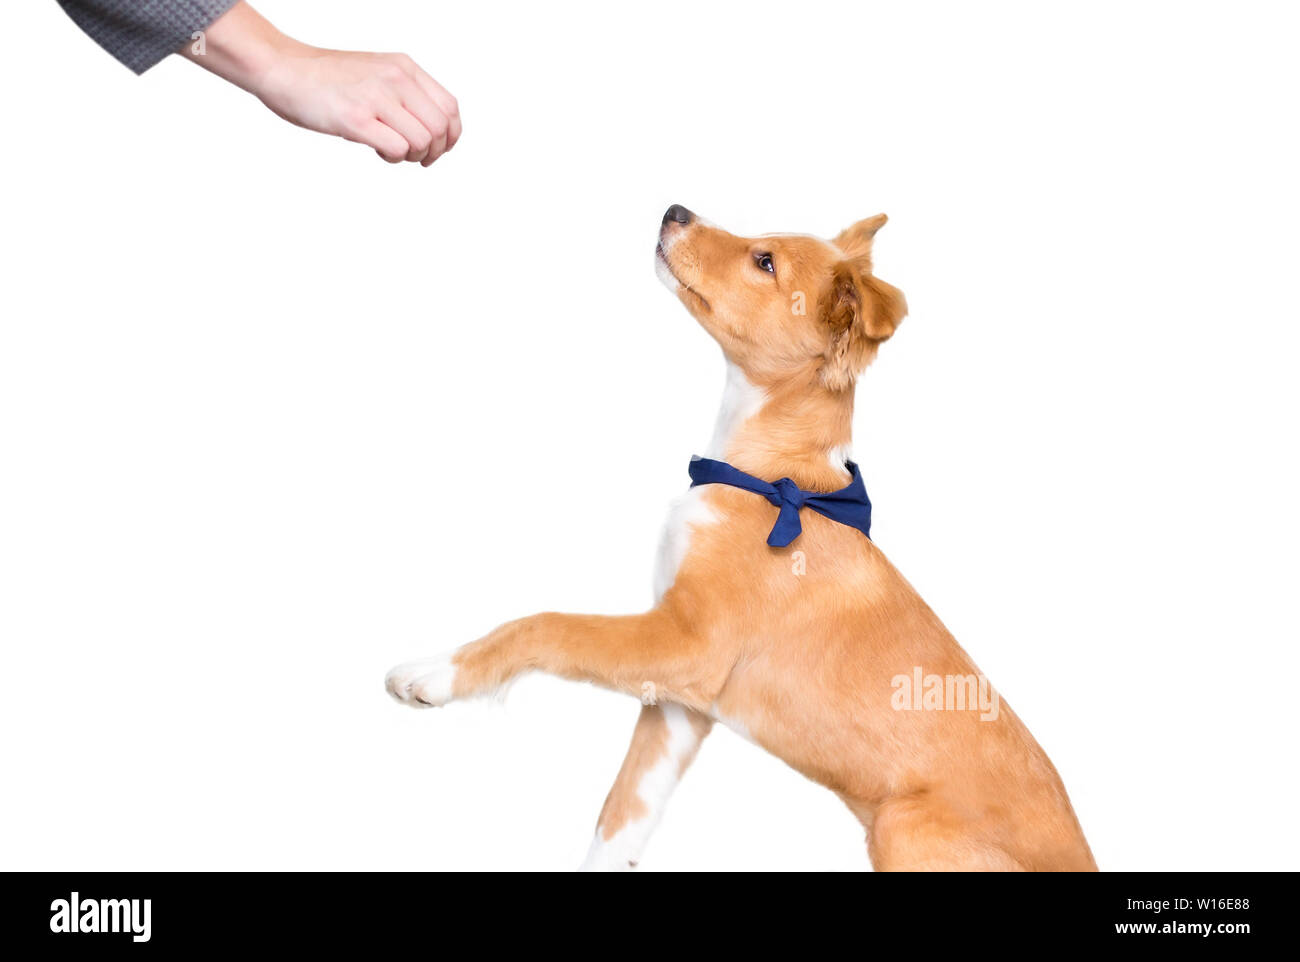 A cute red and white mixed breed puppy receiving a treat while training Stock Photo